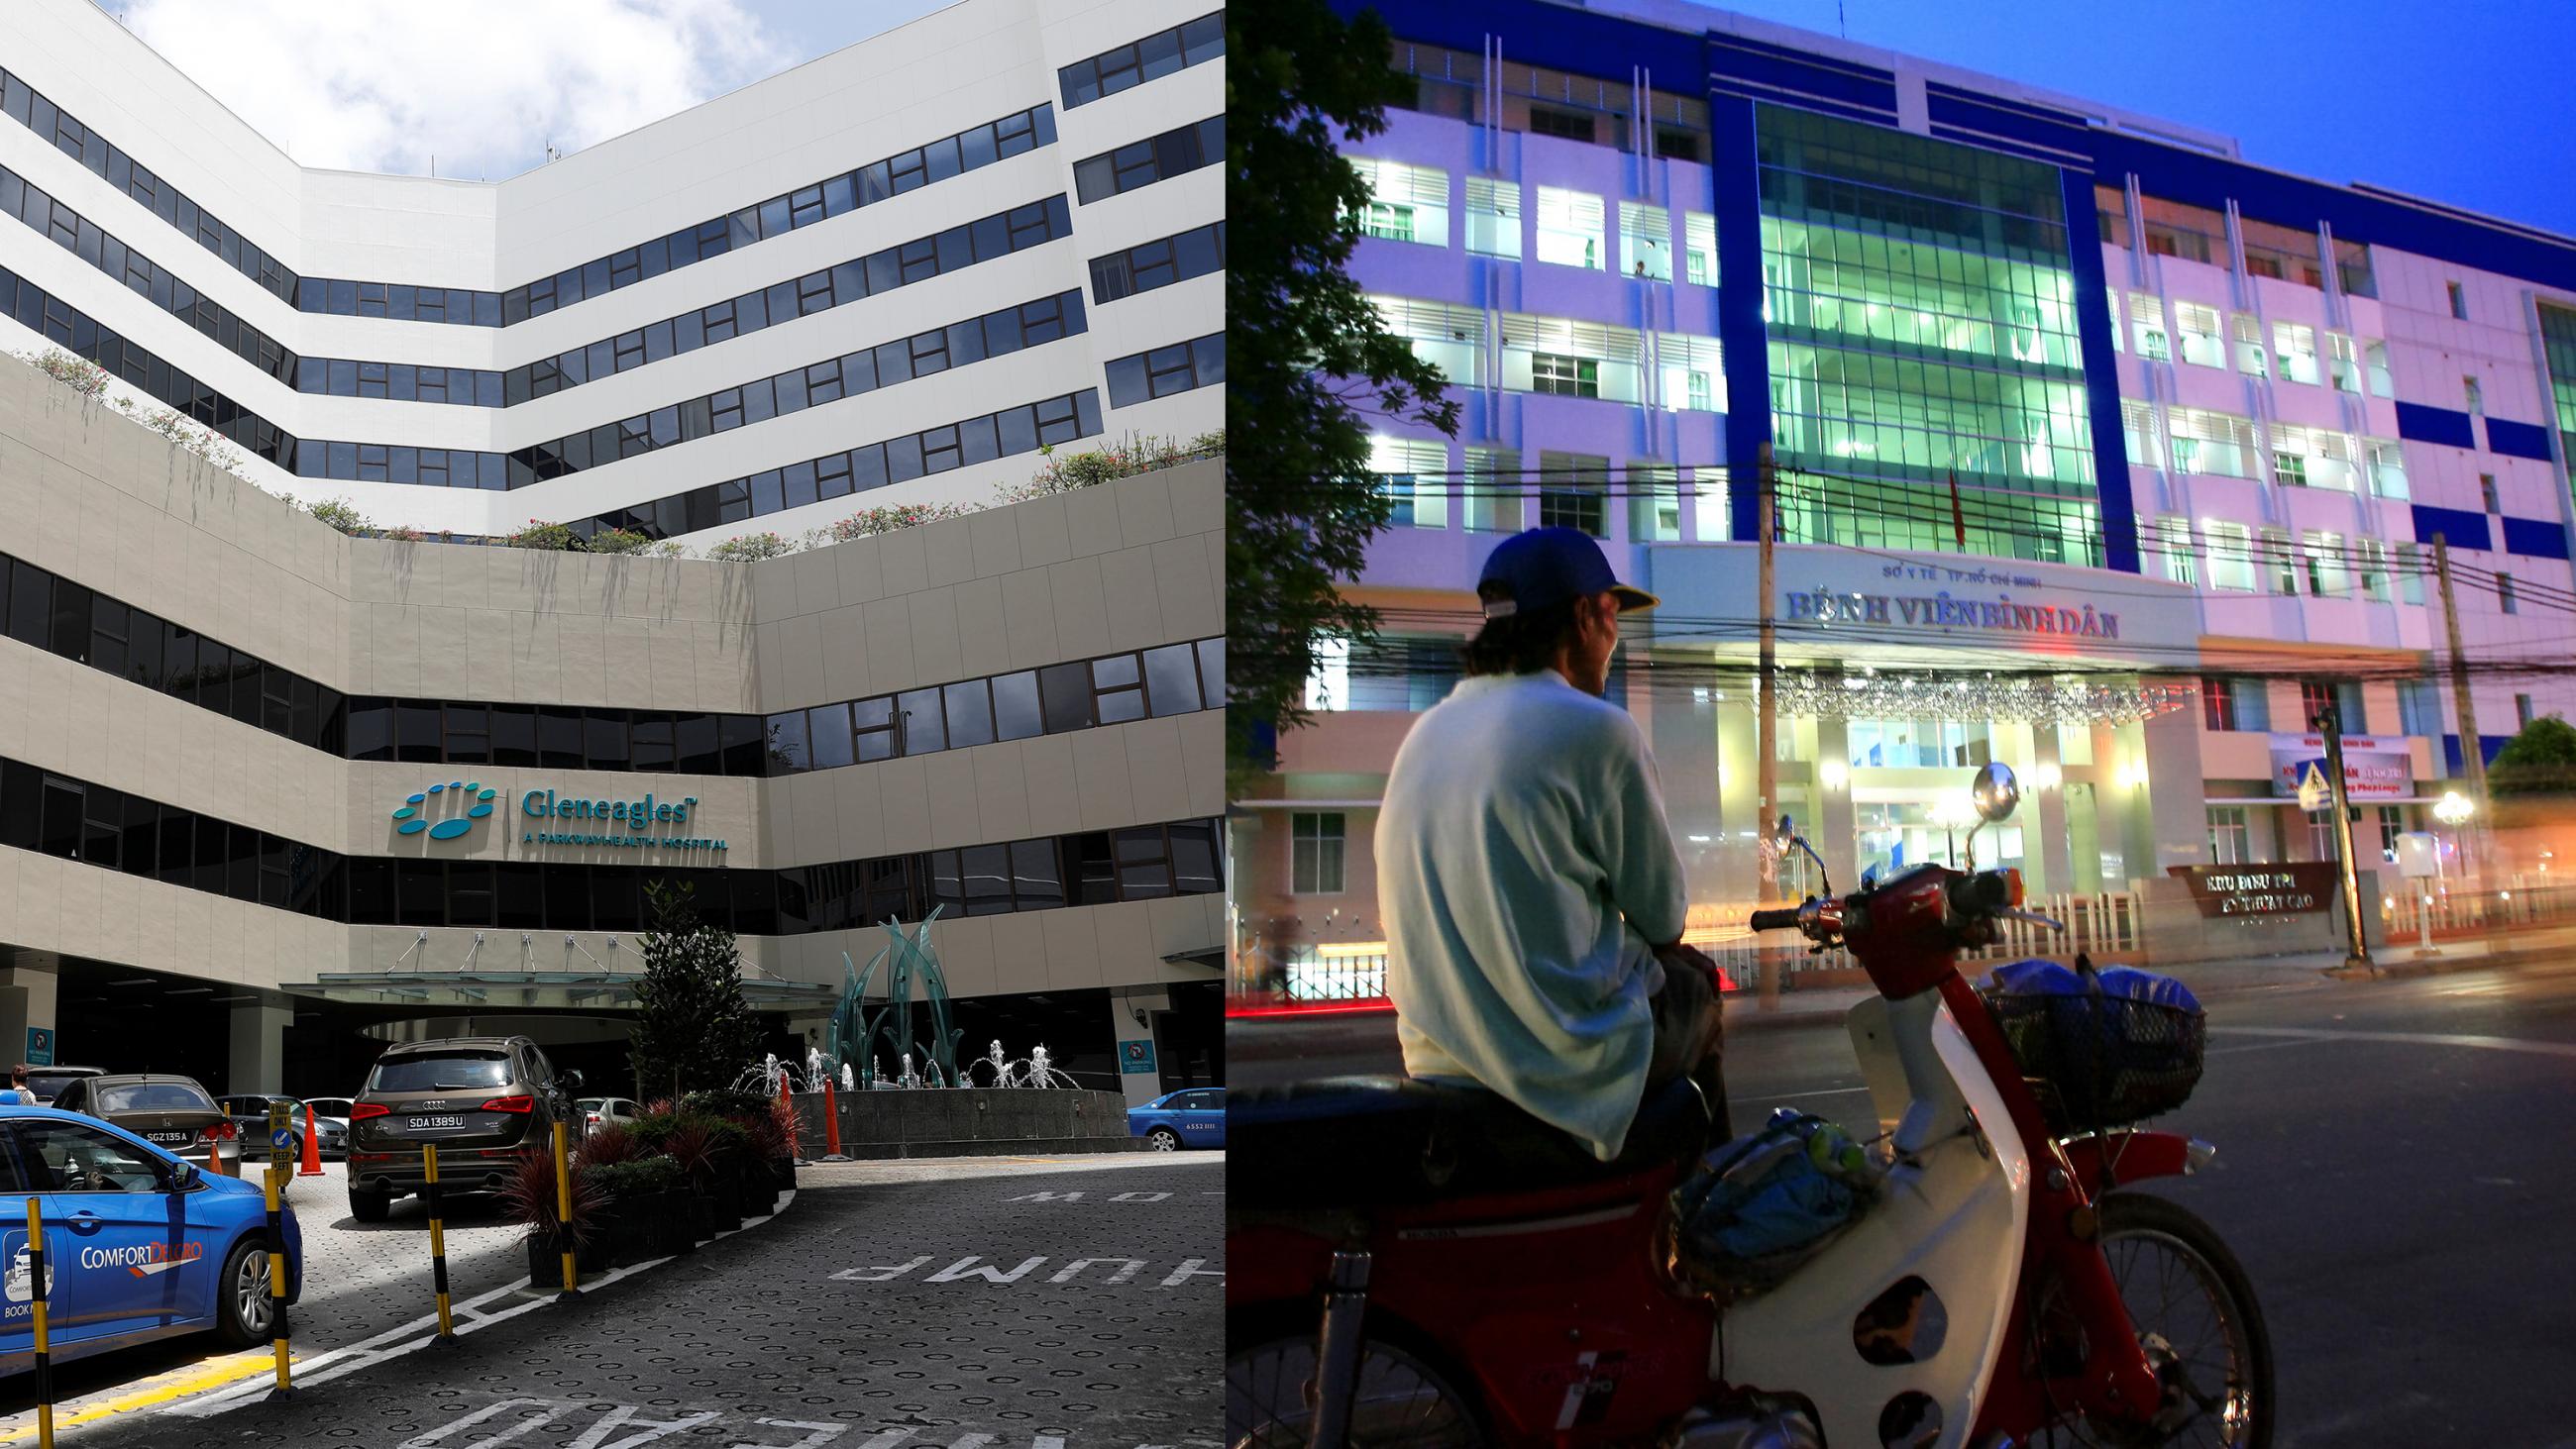 Photo shows two hospitals side by side, one pictured during the day and the other at night.